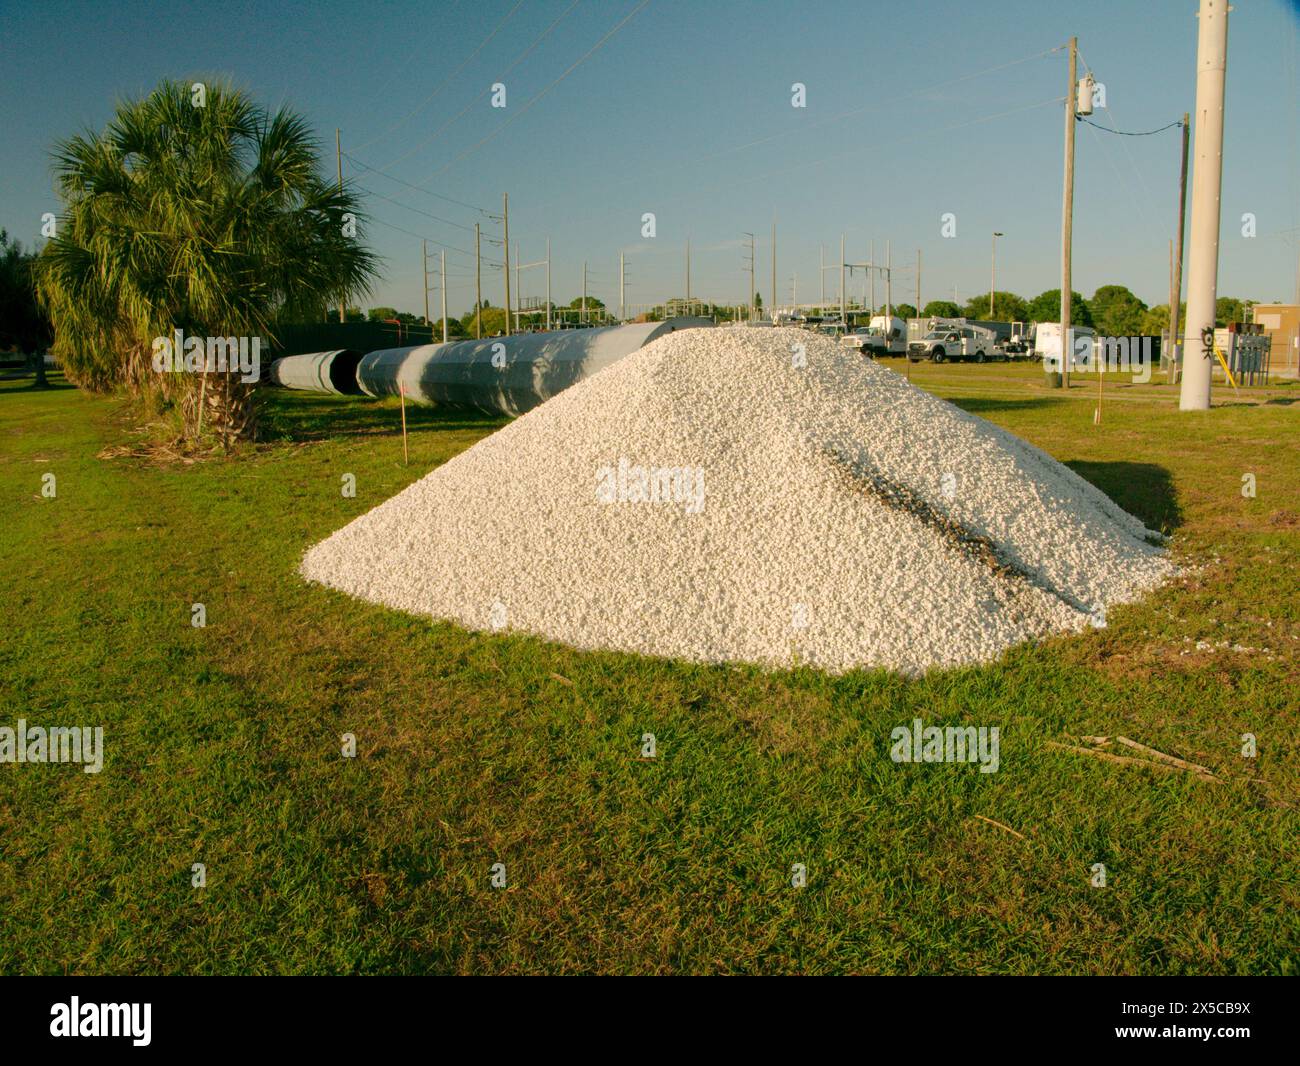 Wide view over green grass to pile of white stones and laying on the ground a steel Utility Pole sections with a Electric Substation in back. Palm Stock Photo